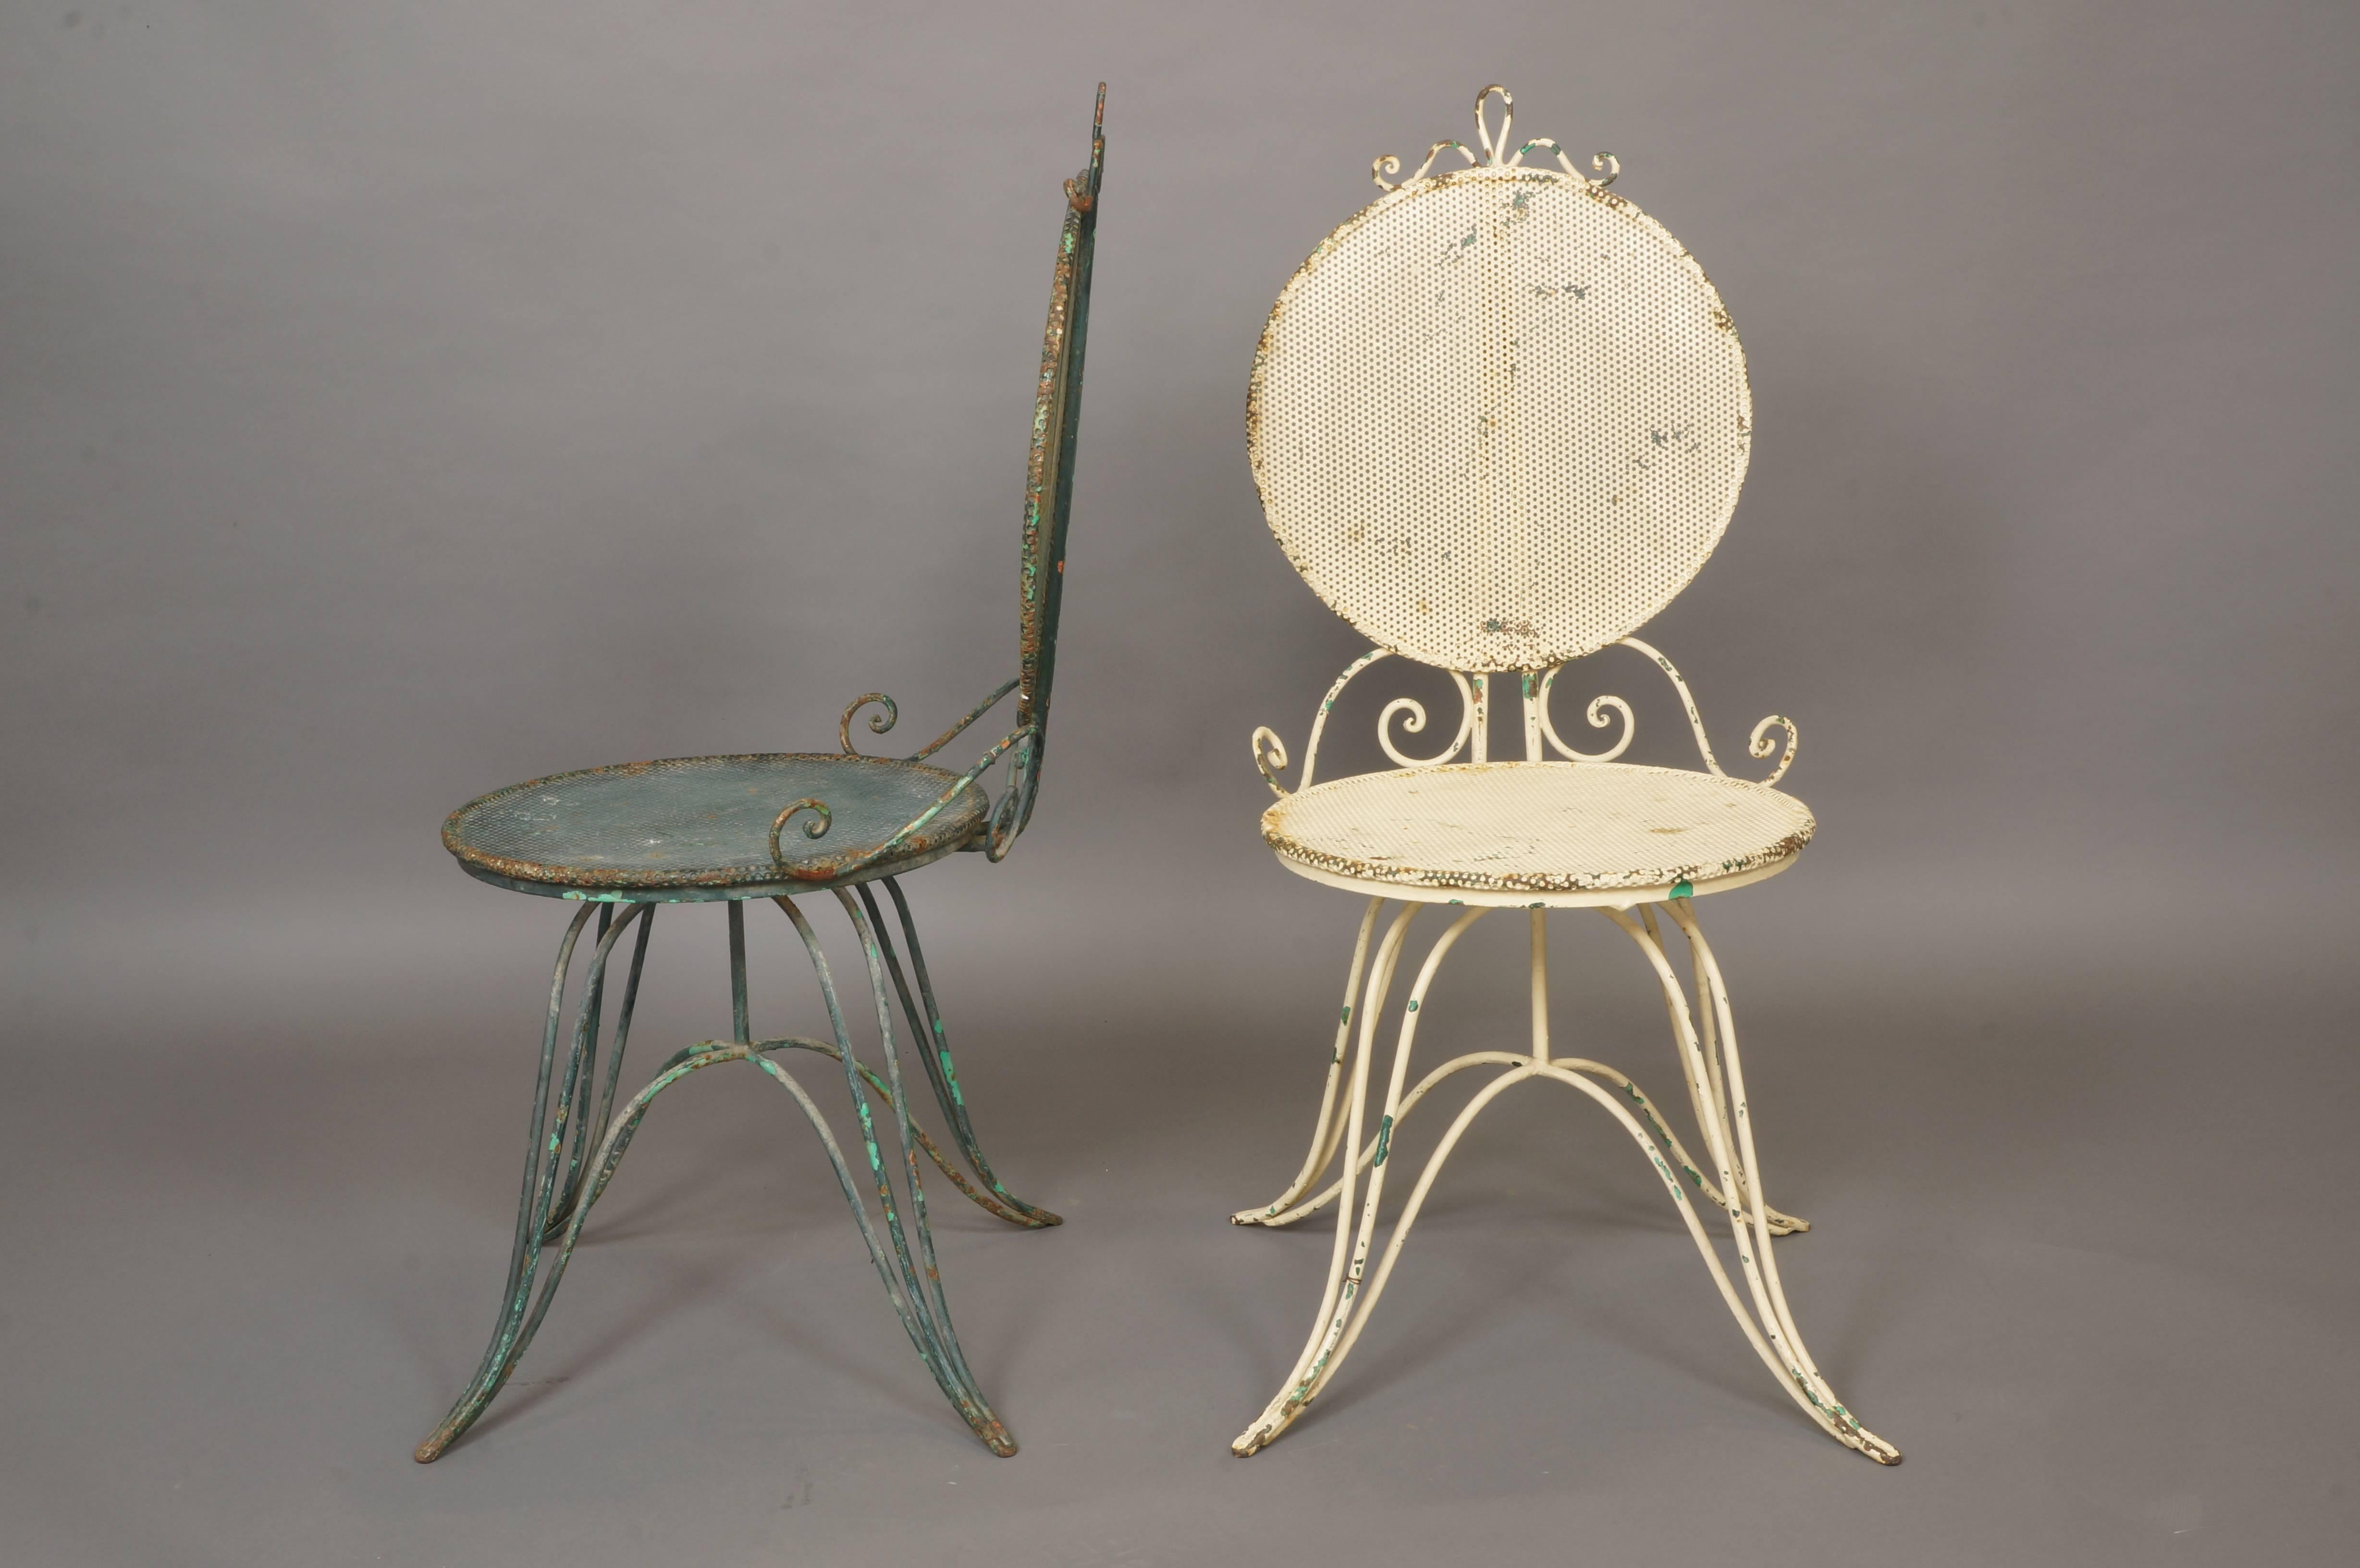 Pair of wrought iron Italian painted garden chairs with perforated round mesh backs and seats. Scrolling detail to top and mid section of chairs. Splayed design to foot and base, circa 1950.